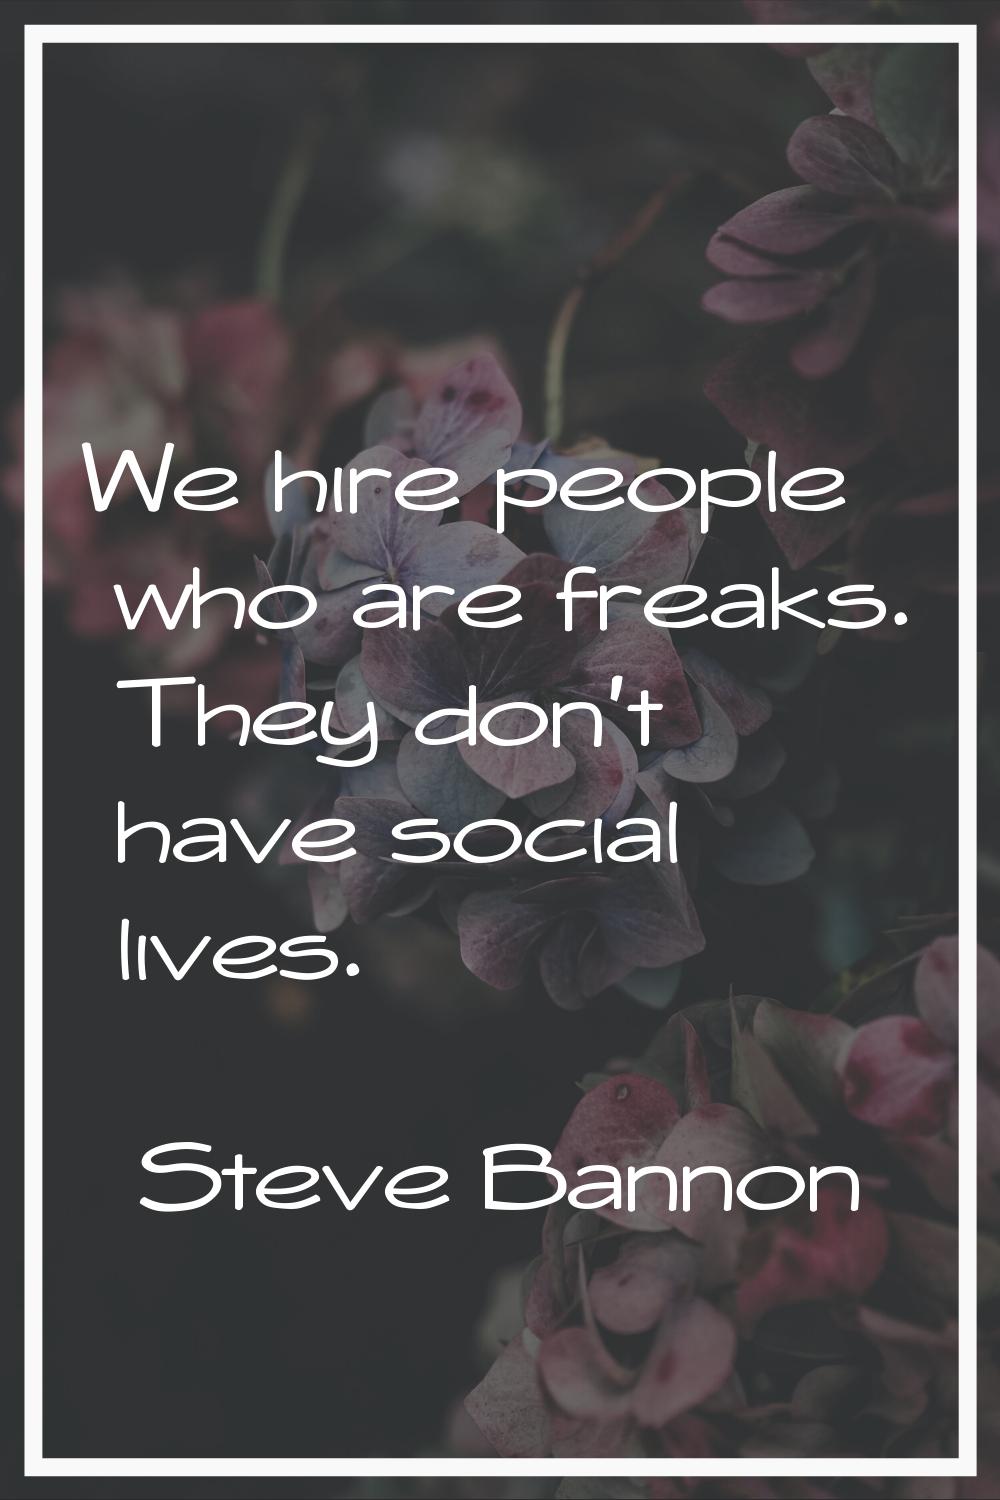 We hire people who are freaks. They don't have social lives.